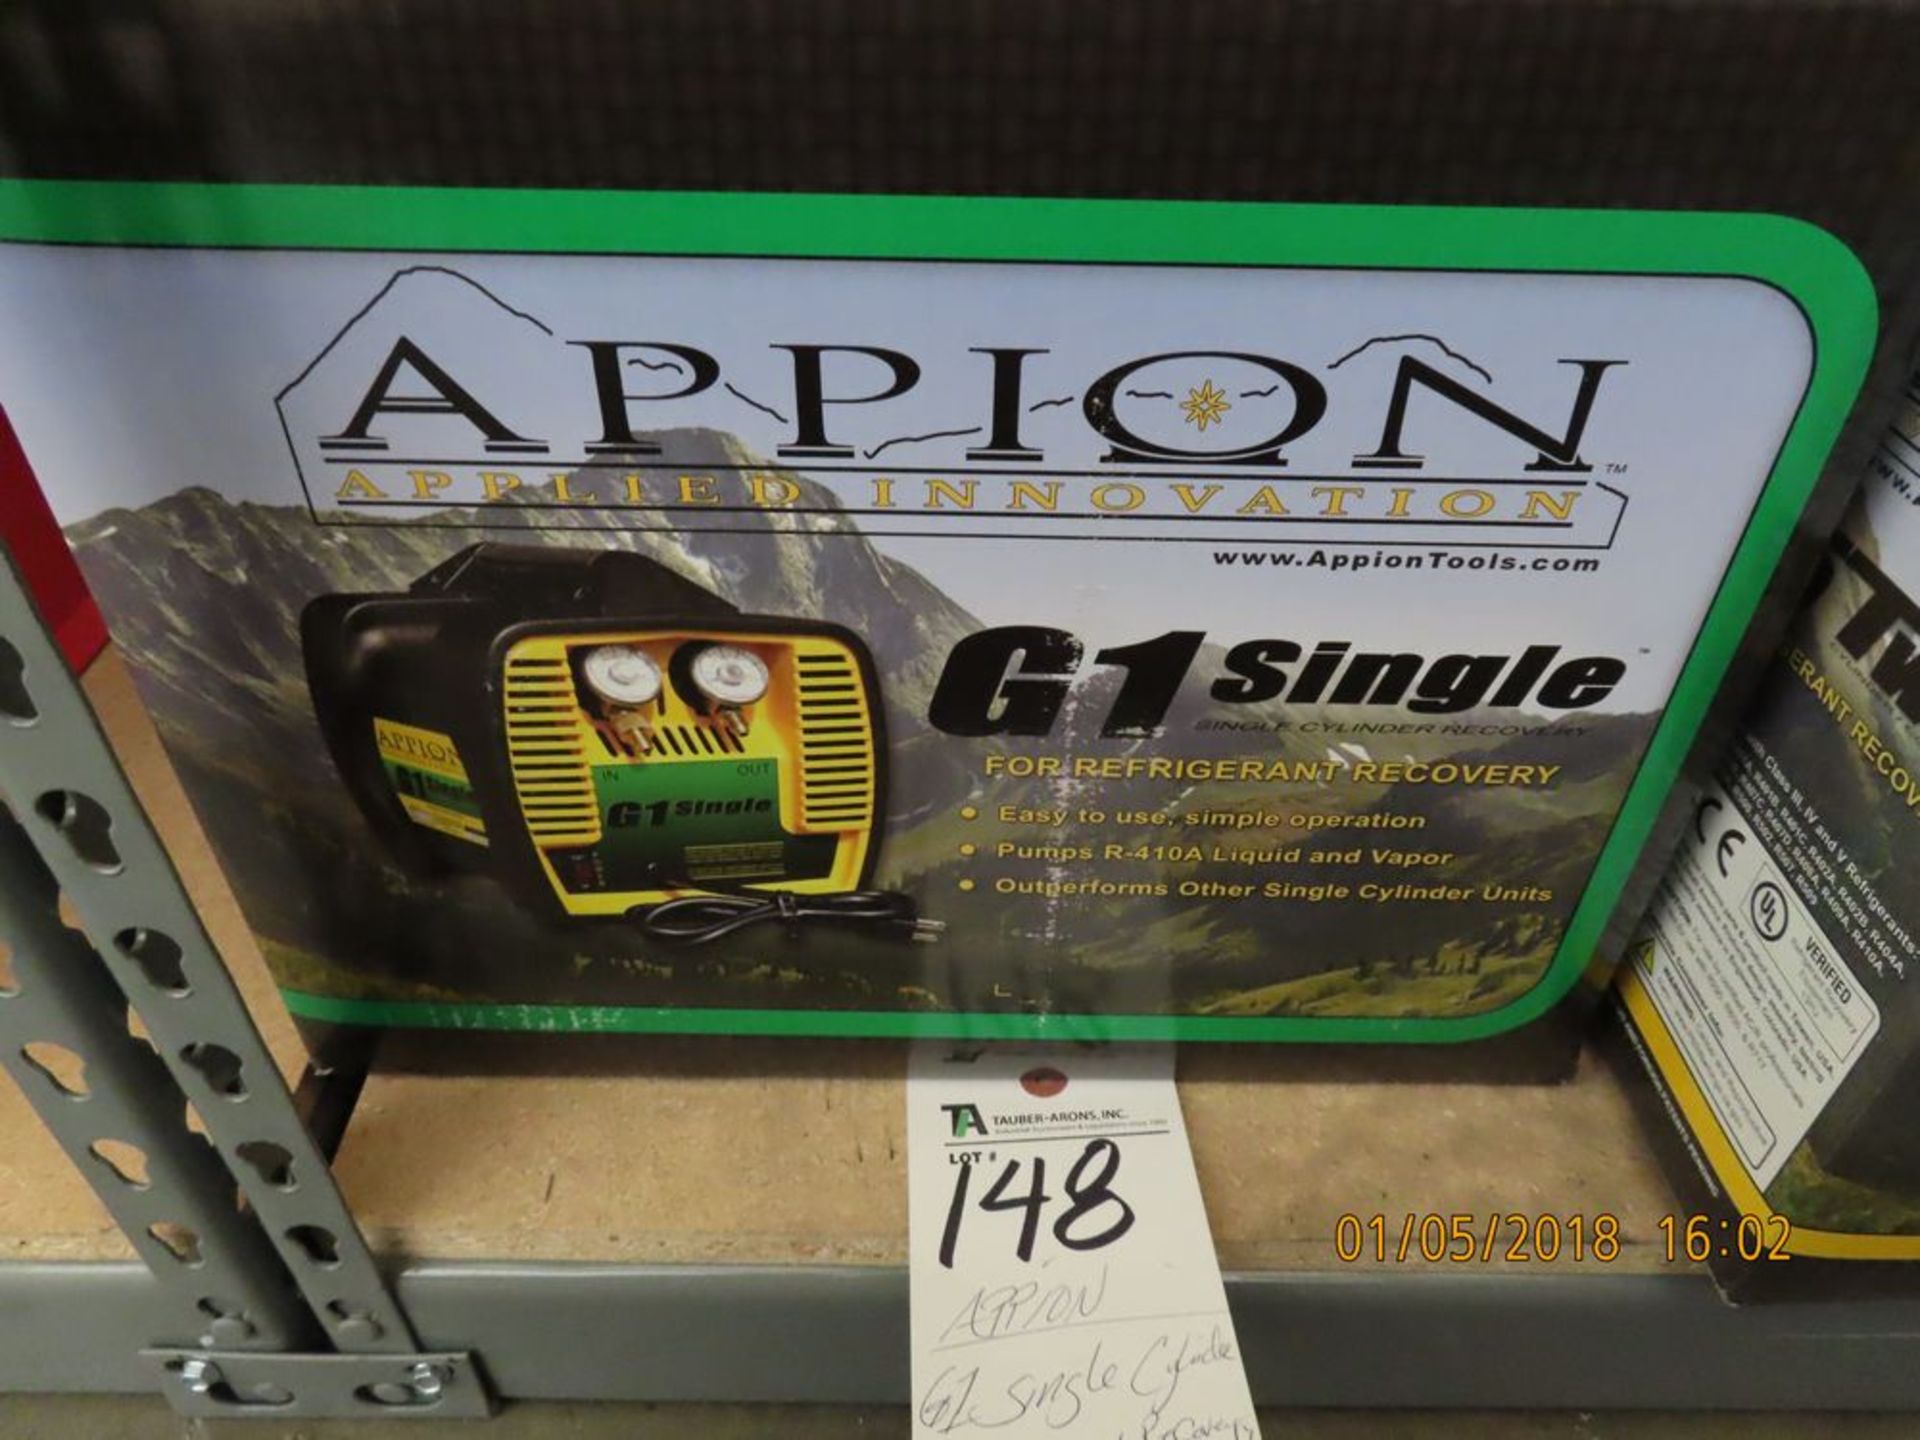 Appion G1 Single Cylinder Refrigerant Recovery Unit